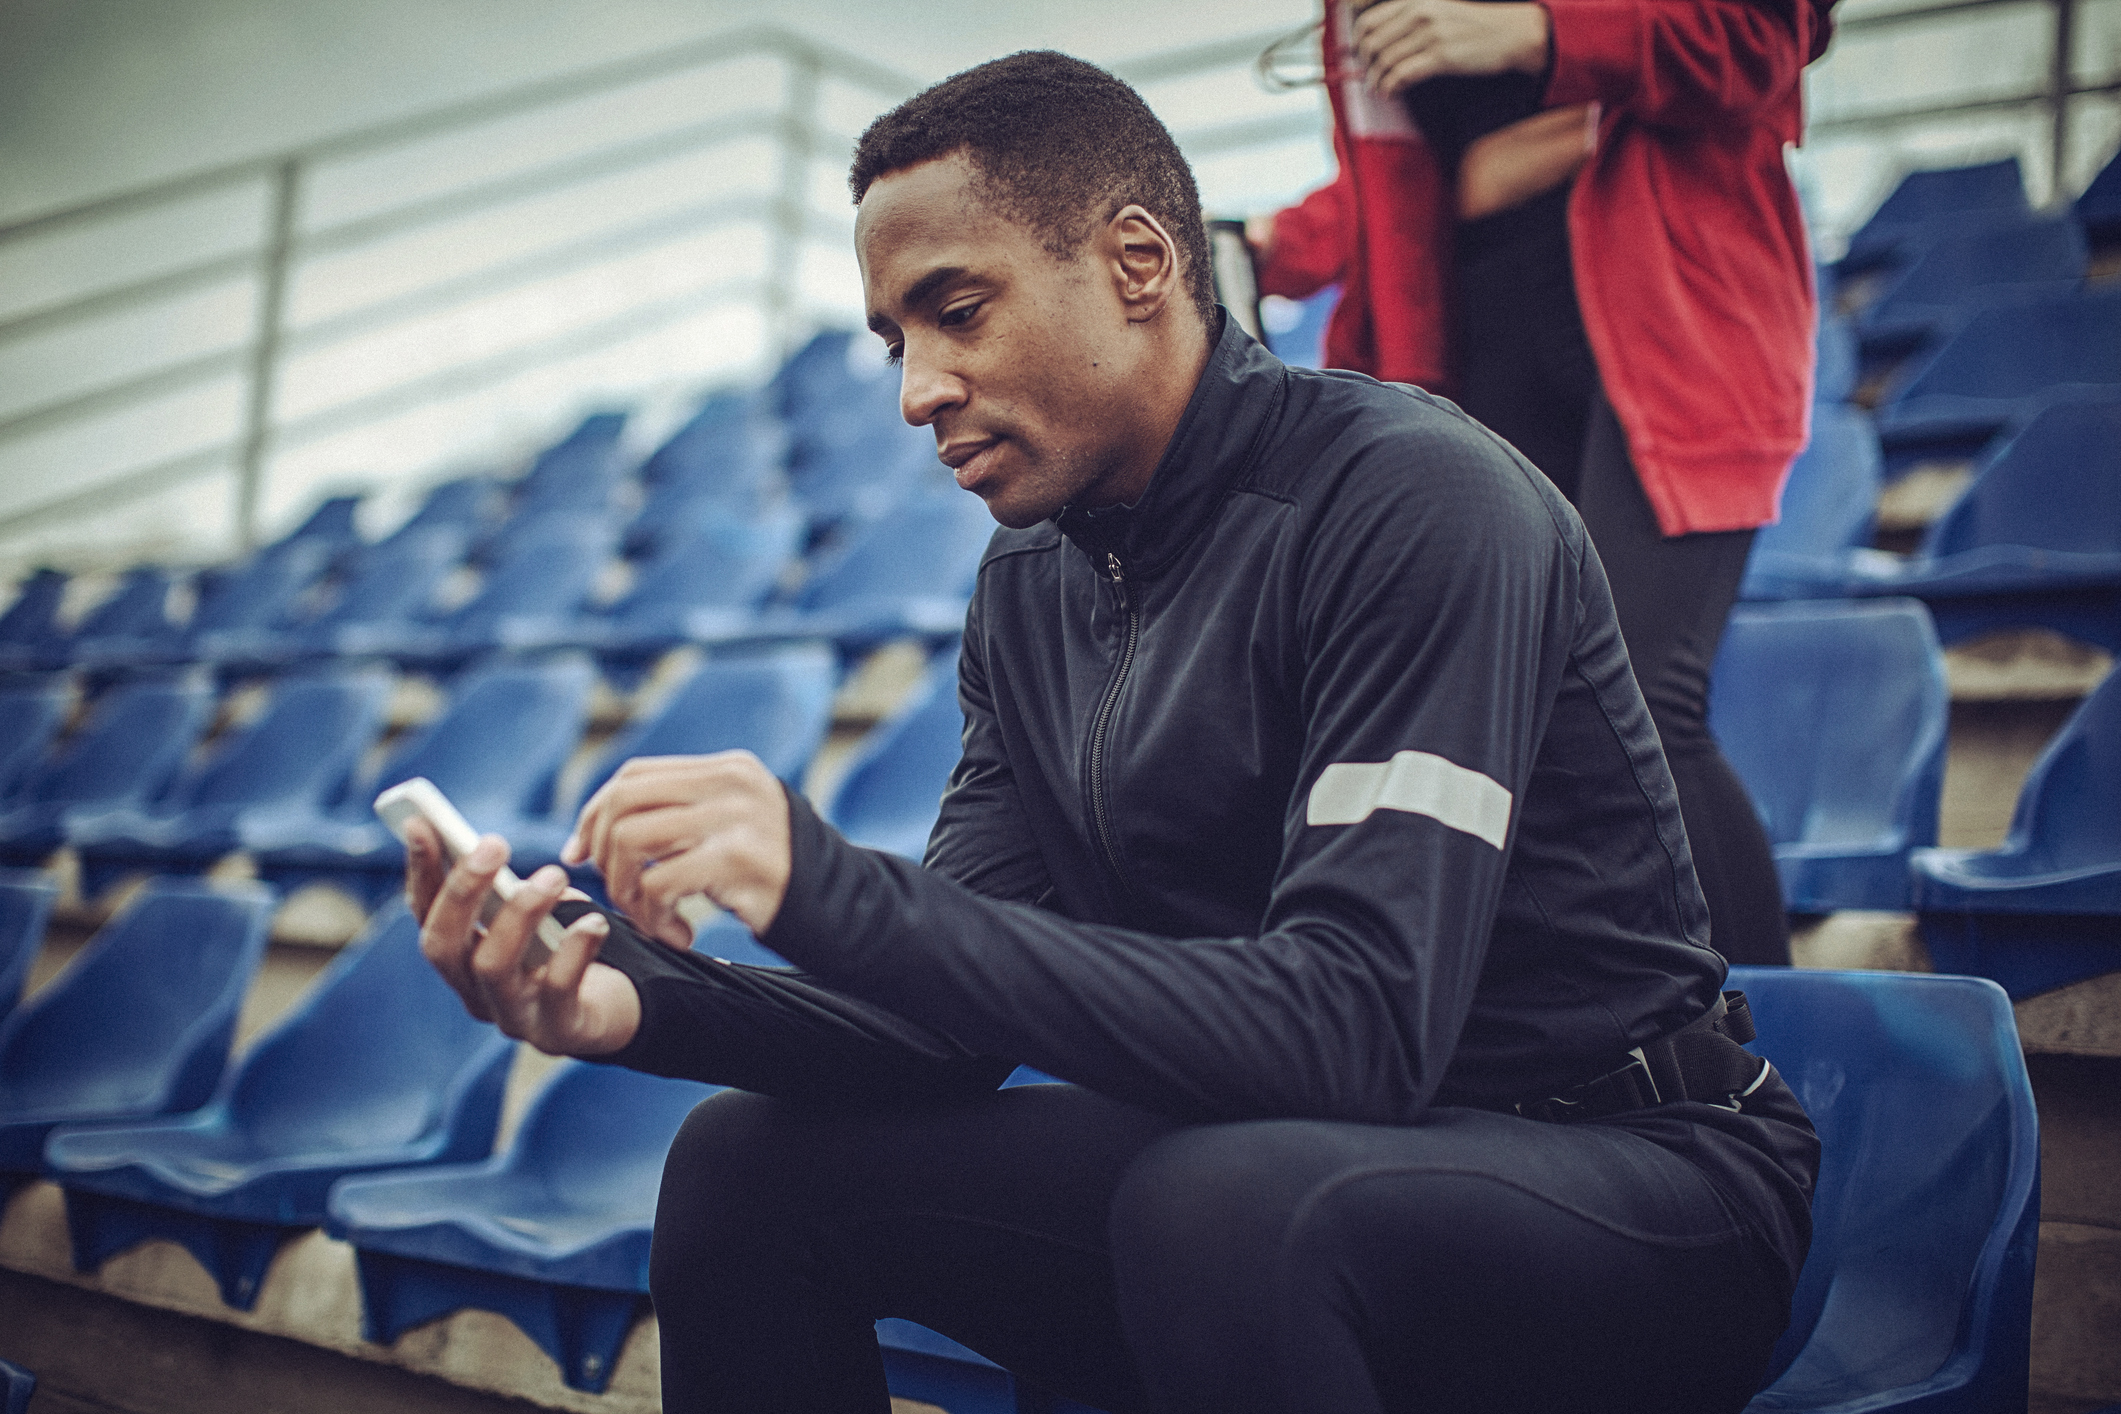 An athlete plays on his phone while seated in a stadium.